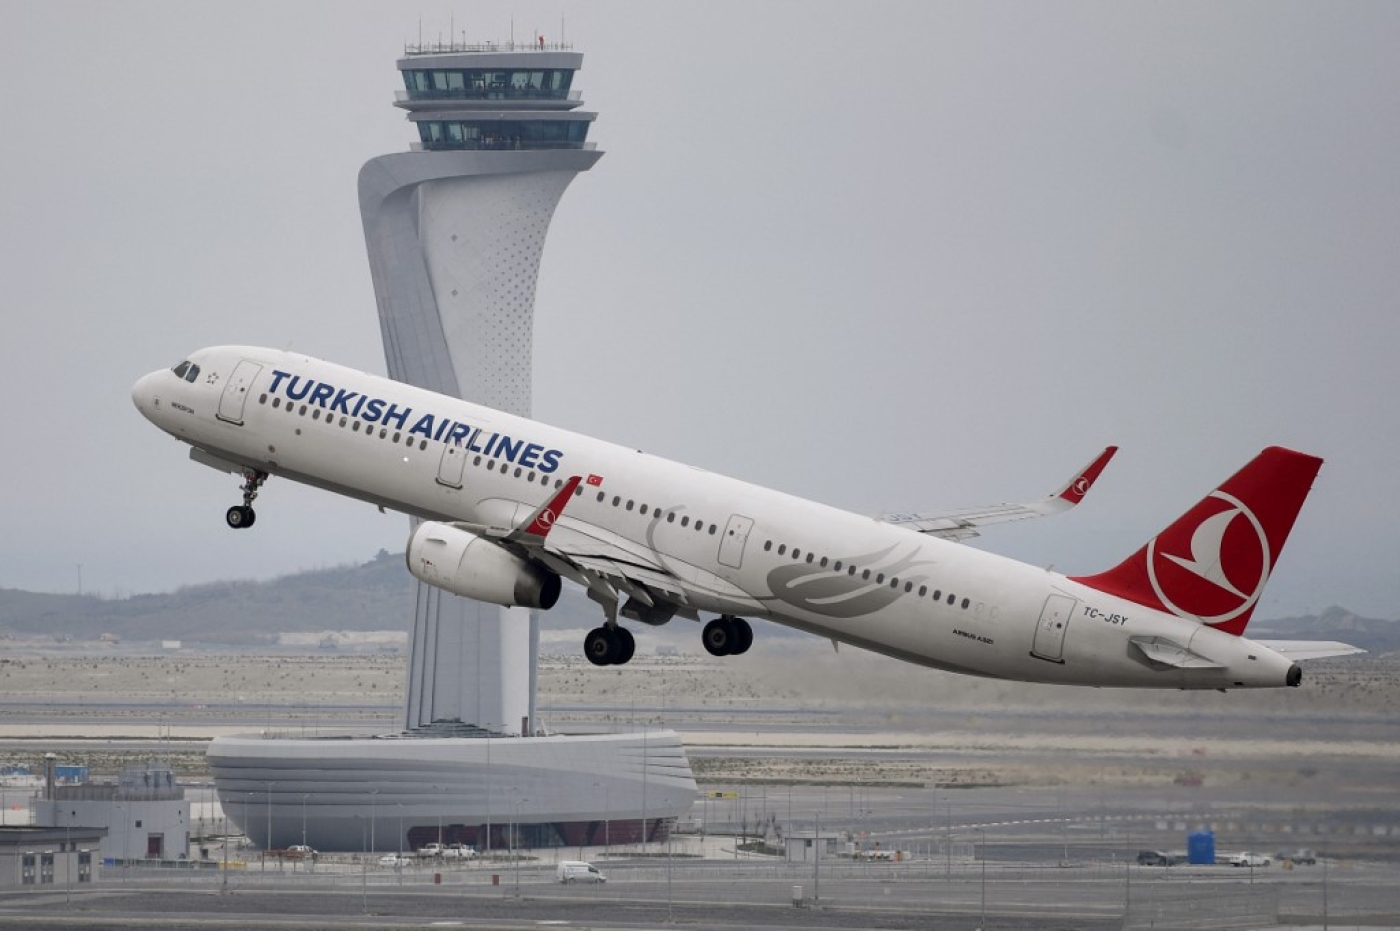 A Turkish Airlines plane takes off at Istanbul Airport on 6 April 2019.